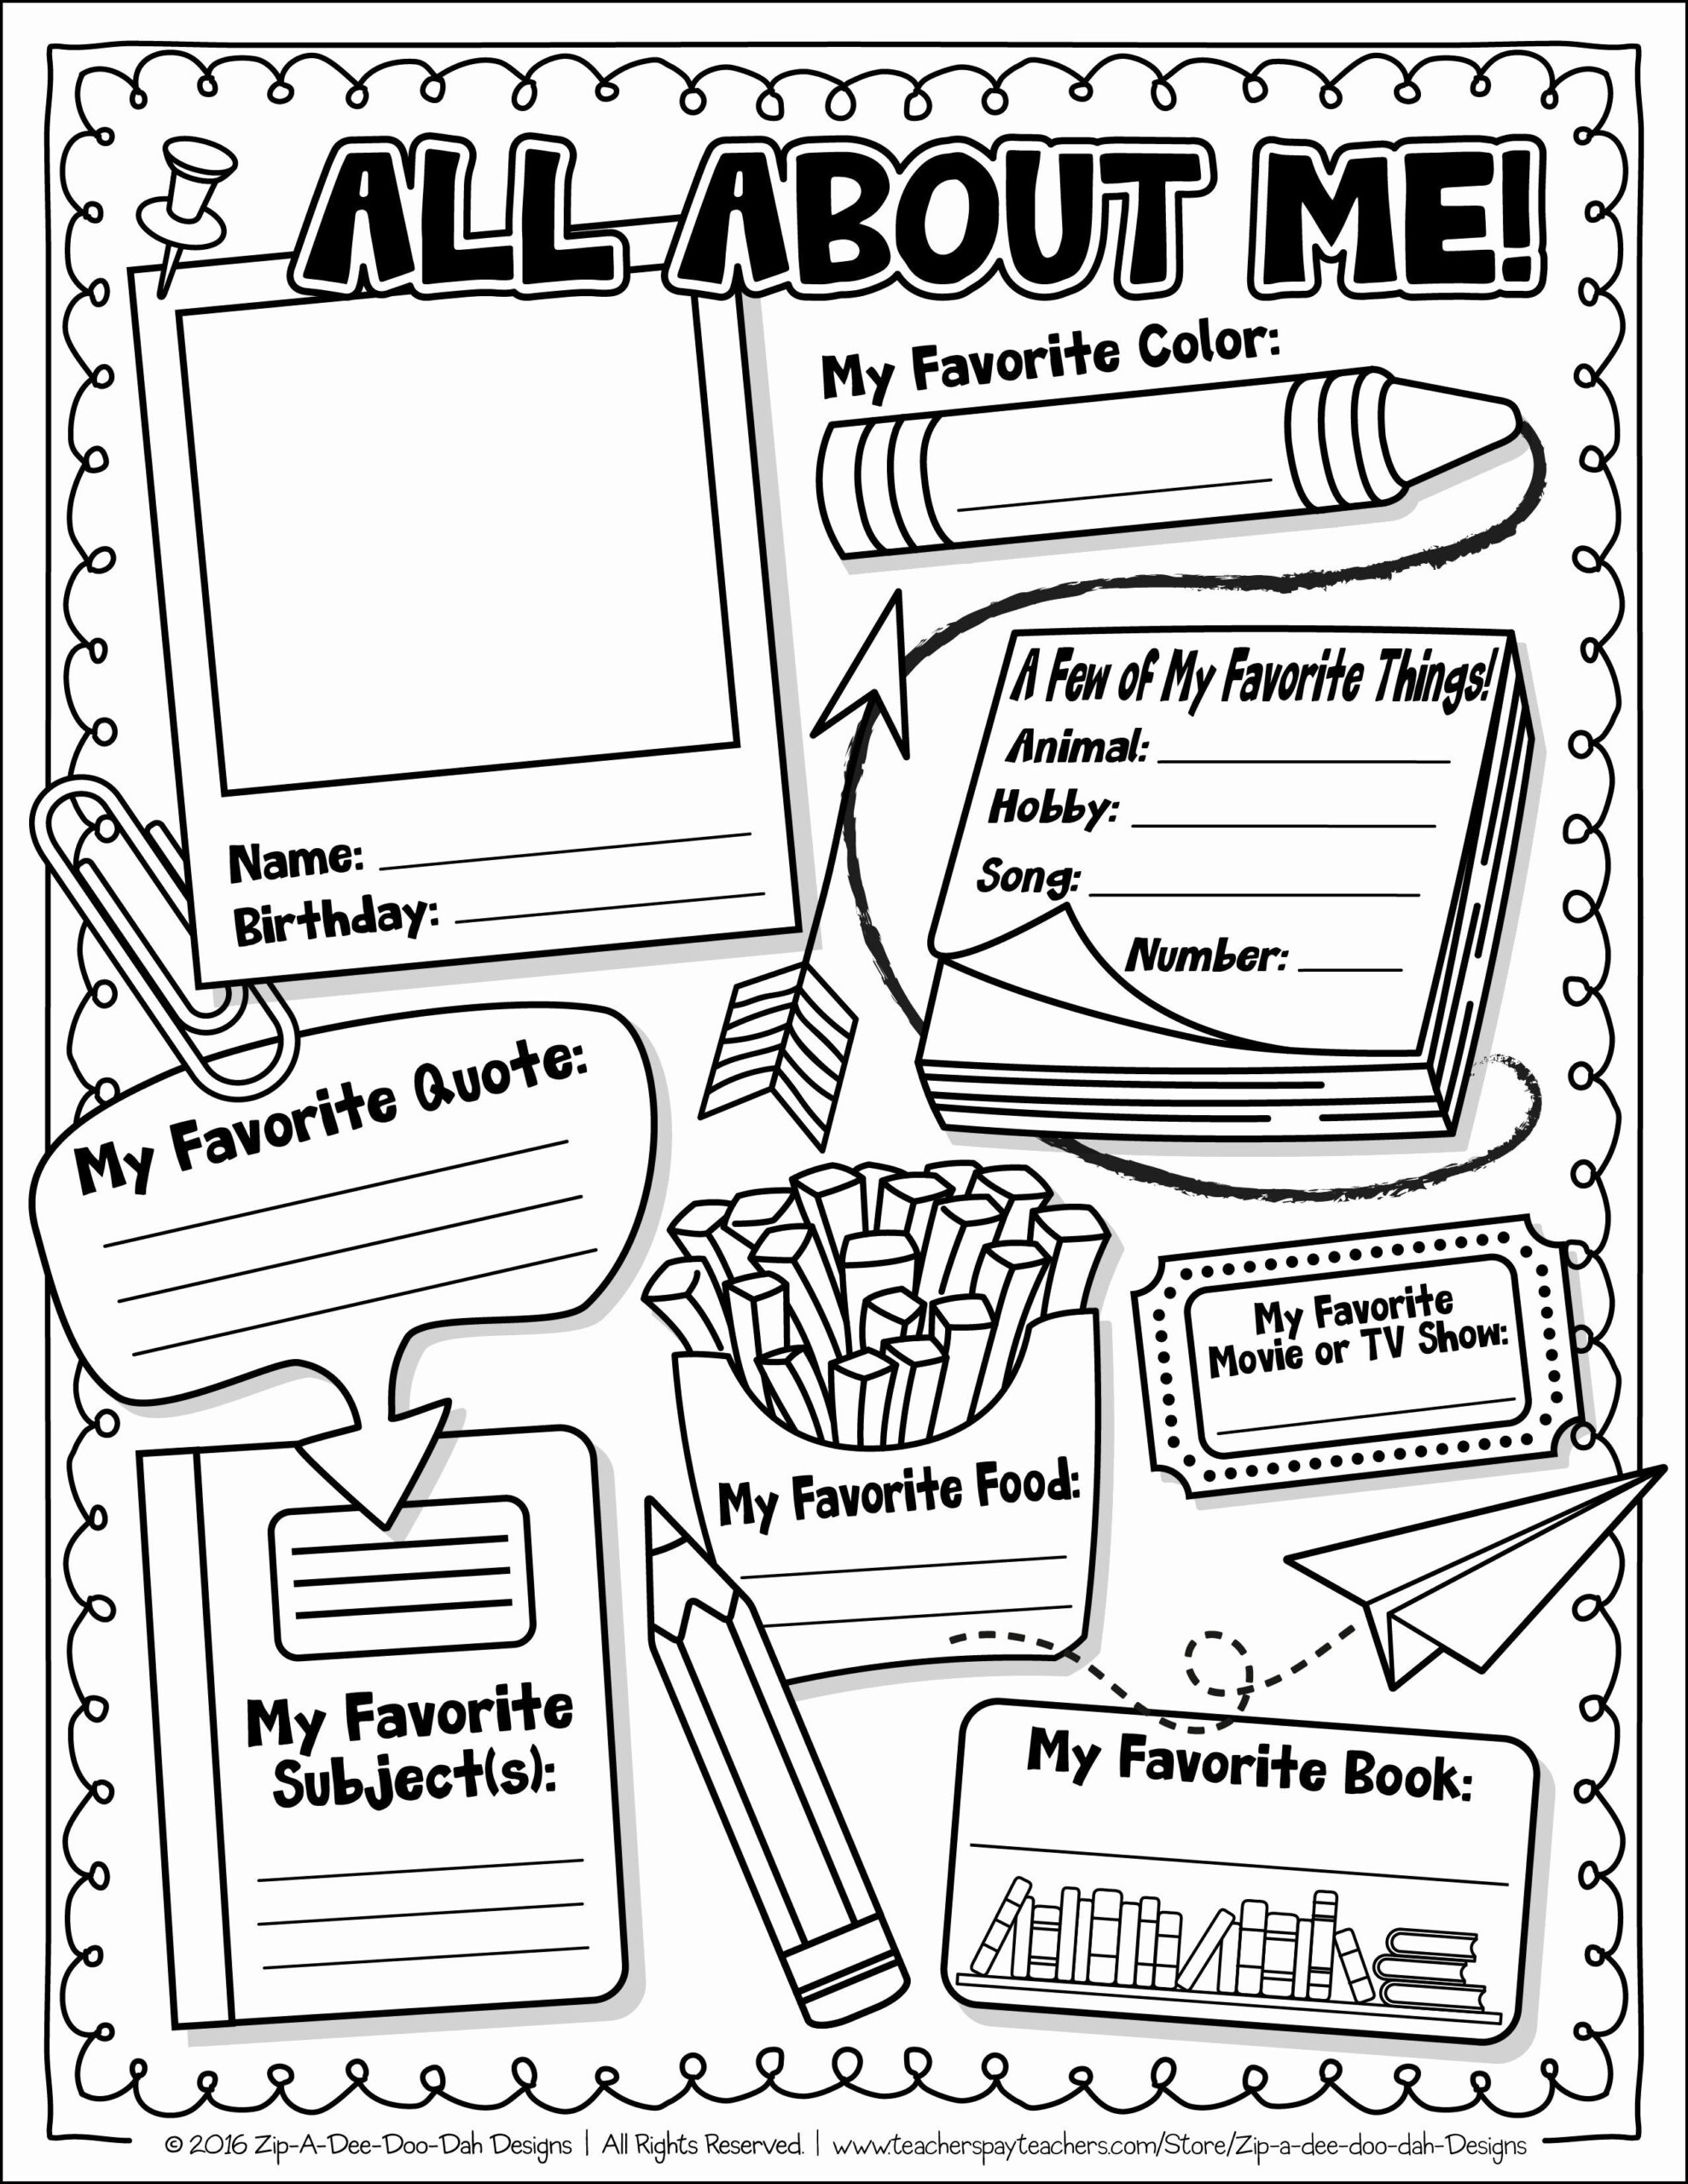 all-about-me-printable-middle-school-all-about-me-worksheets